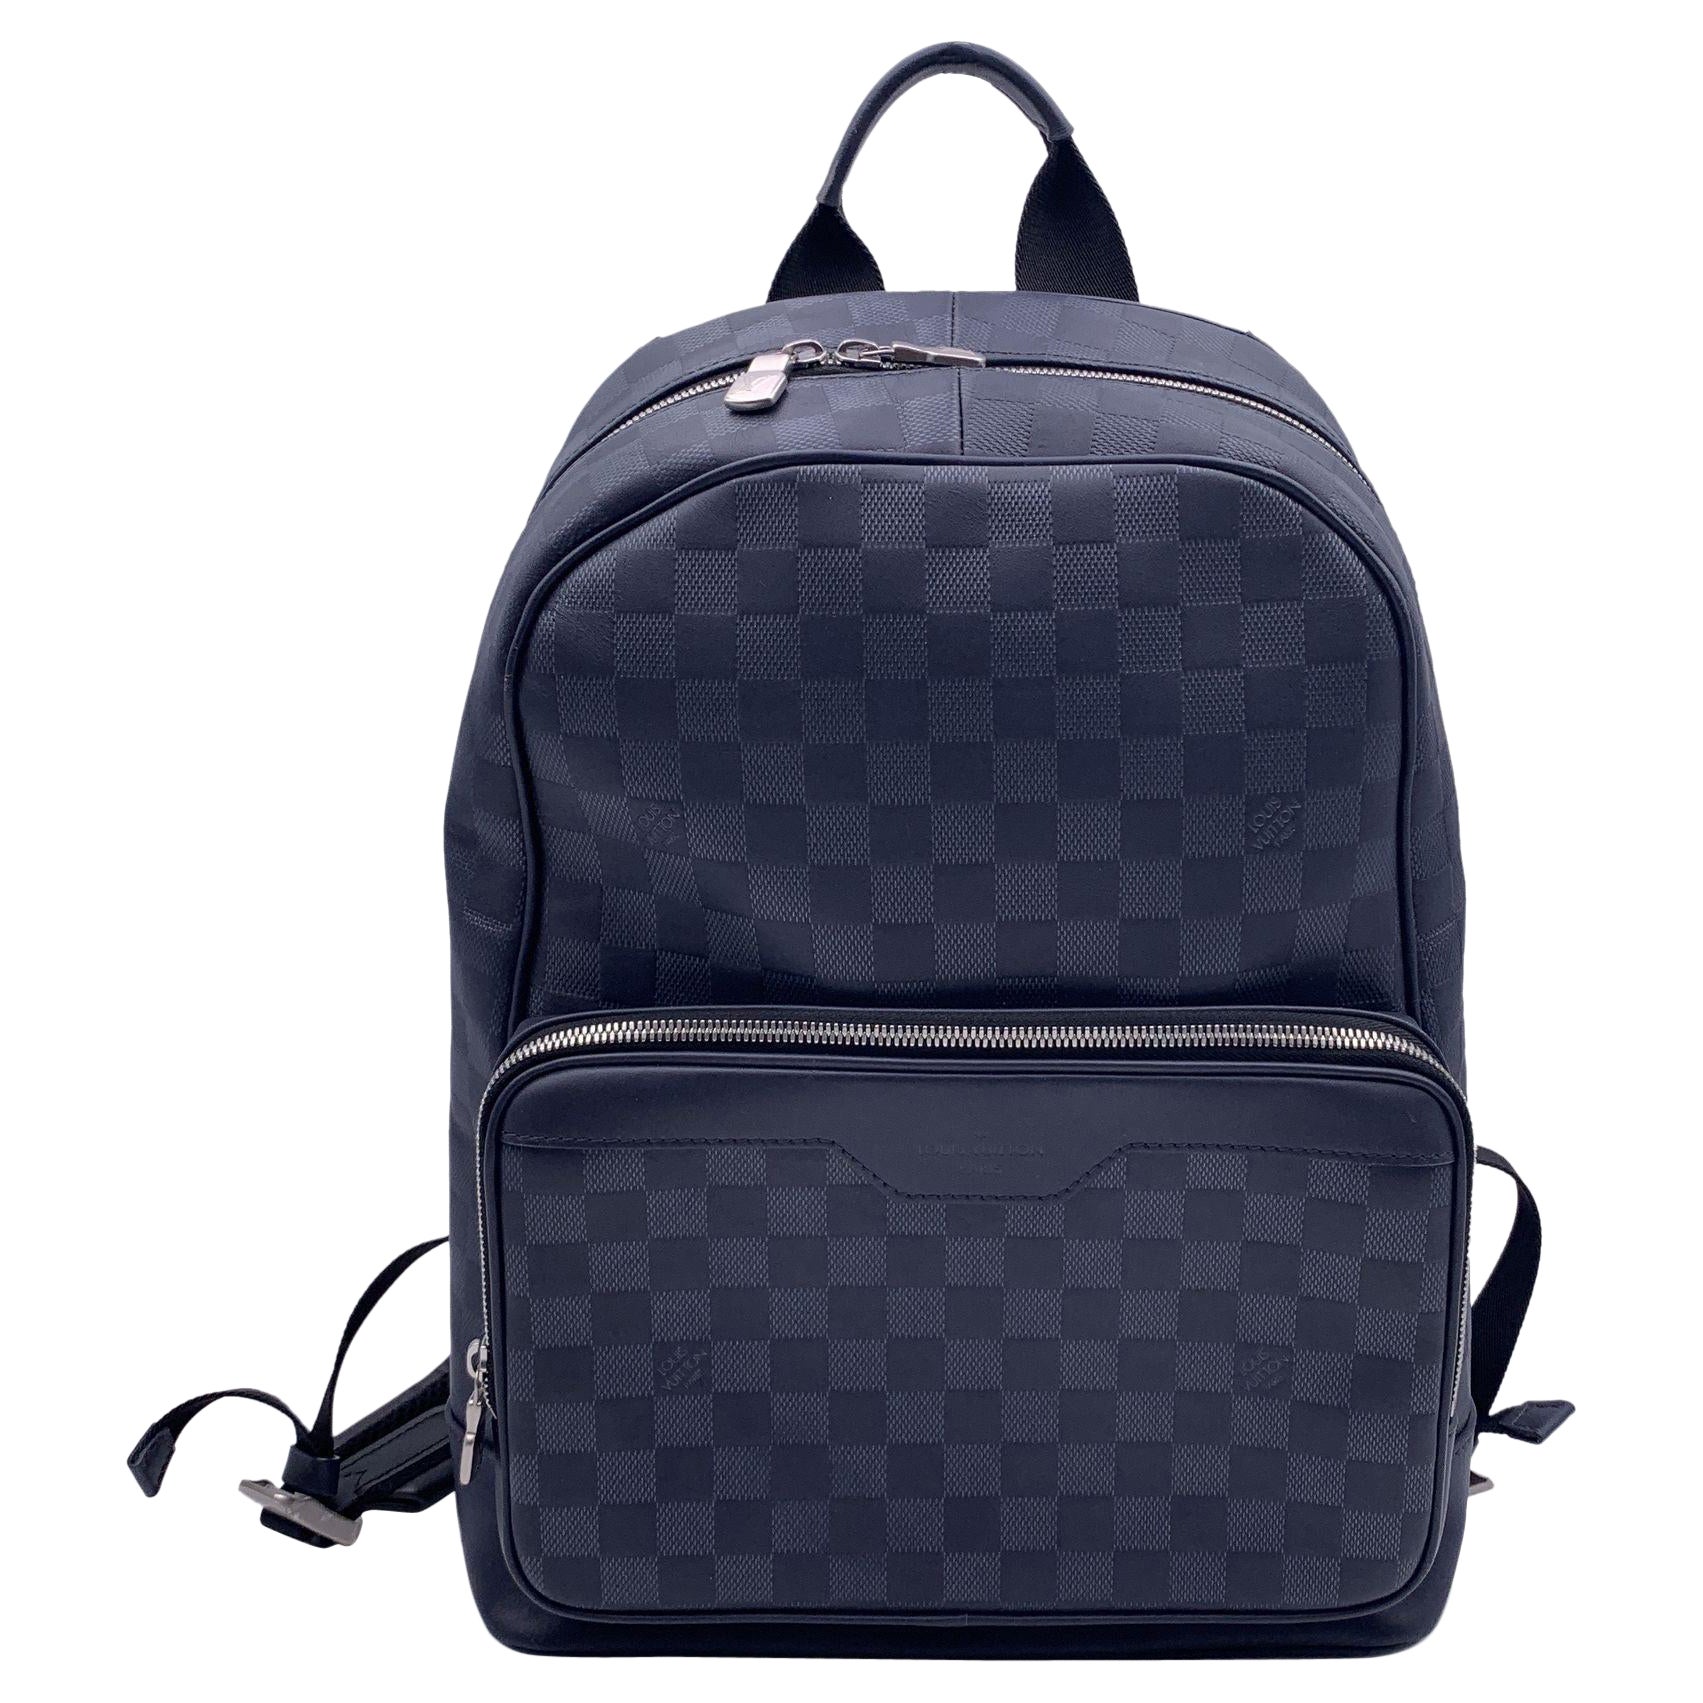 Louis Vuitton Blue Astral Damier Infini Leather Campus Backpack Bag